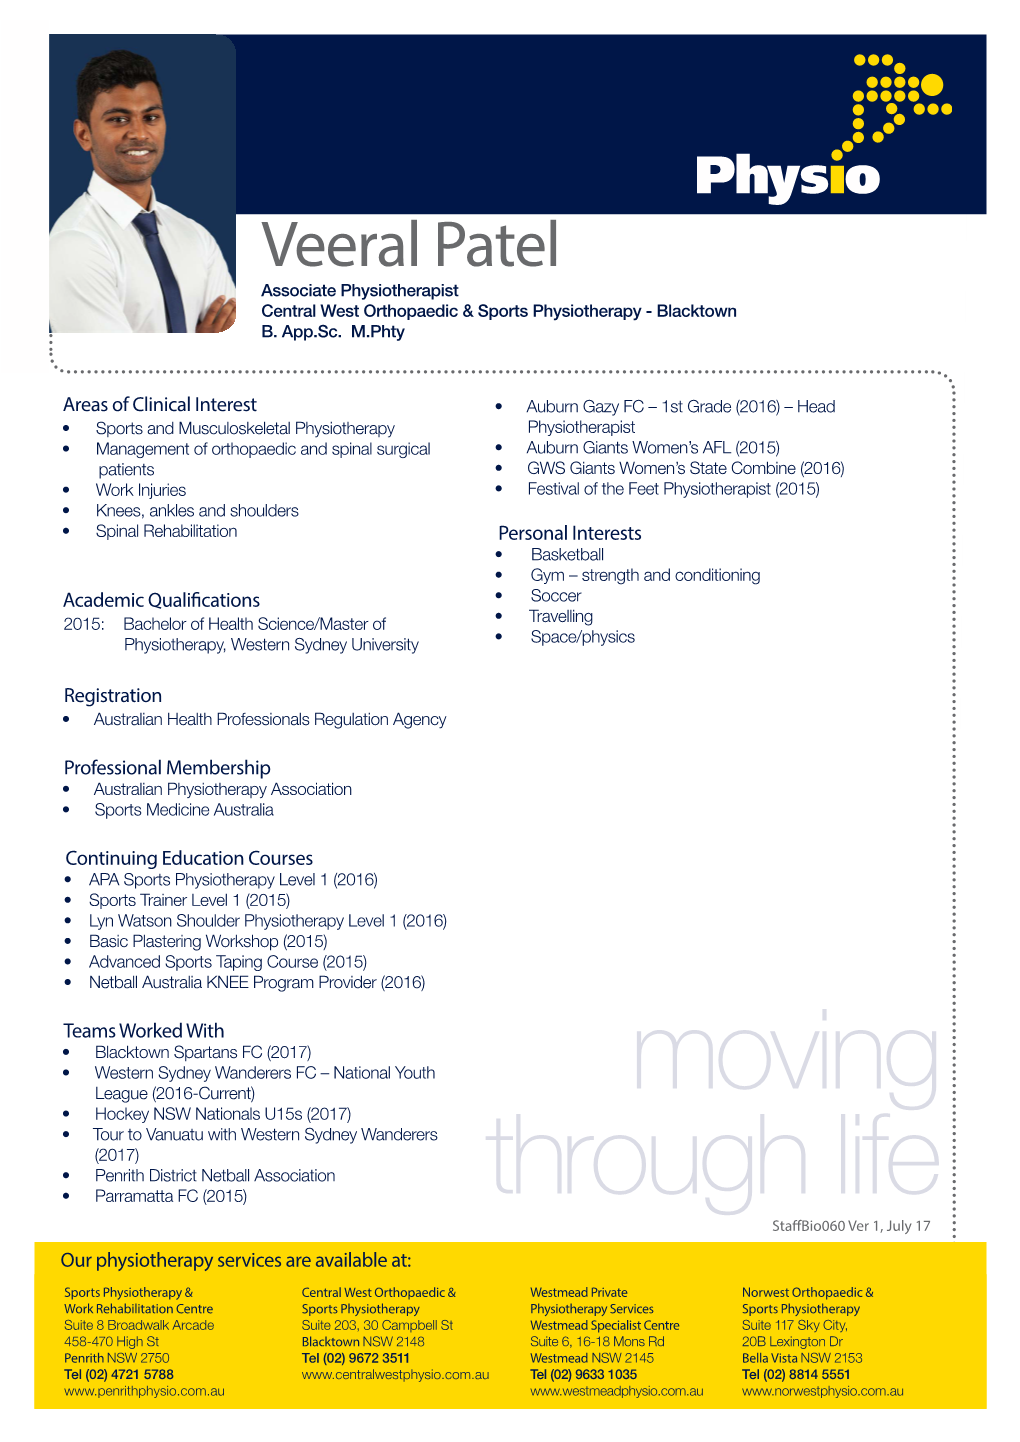 Veeral Patel Associate Physiotherapist Central West Orthopaedic & Sports Physiotherapy - Blacktown B